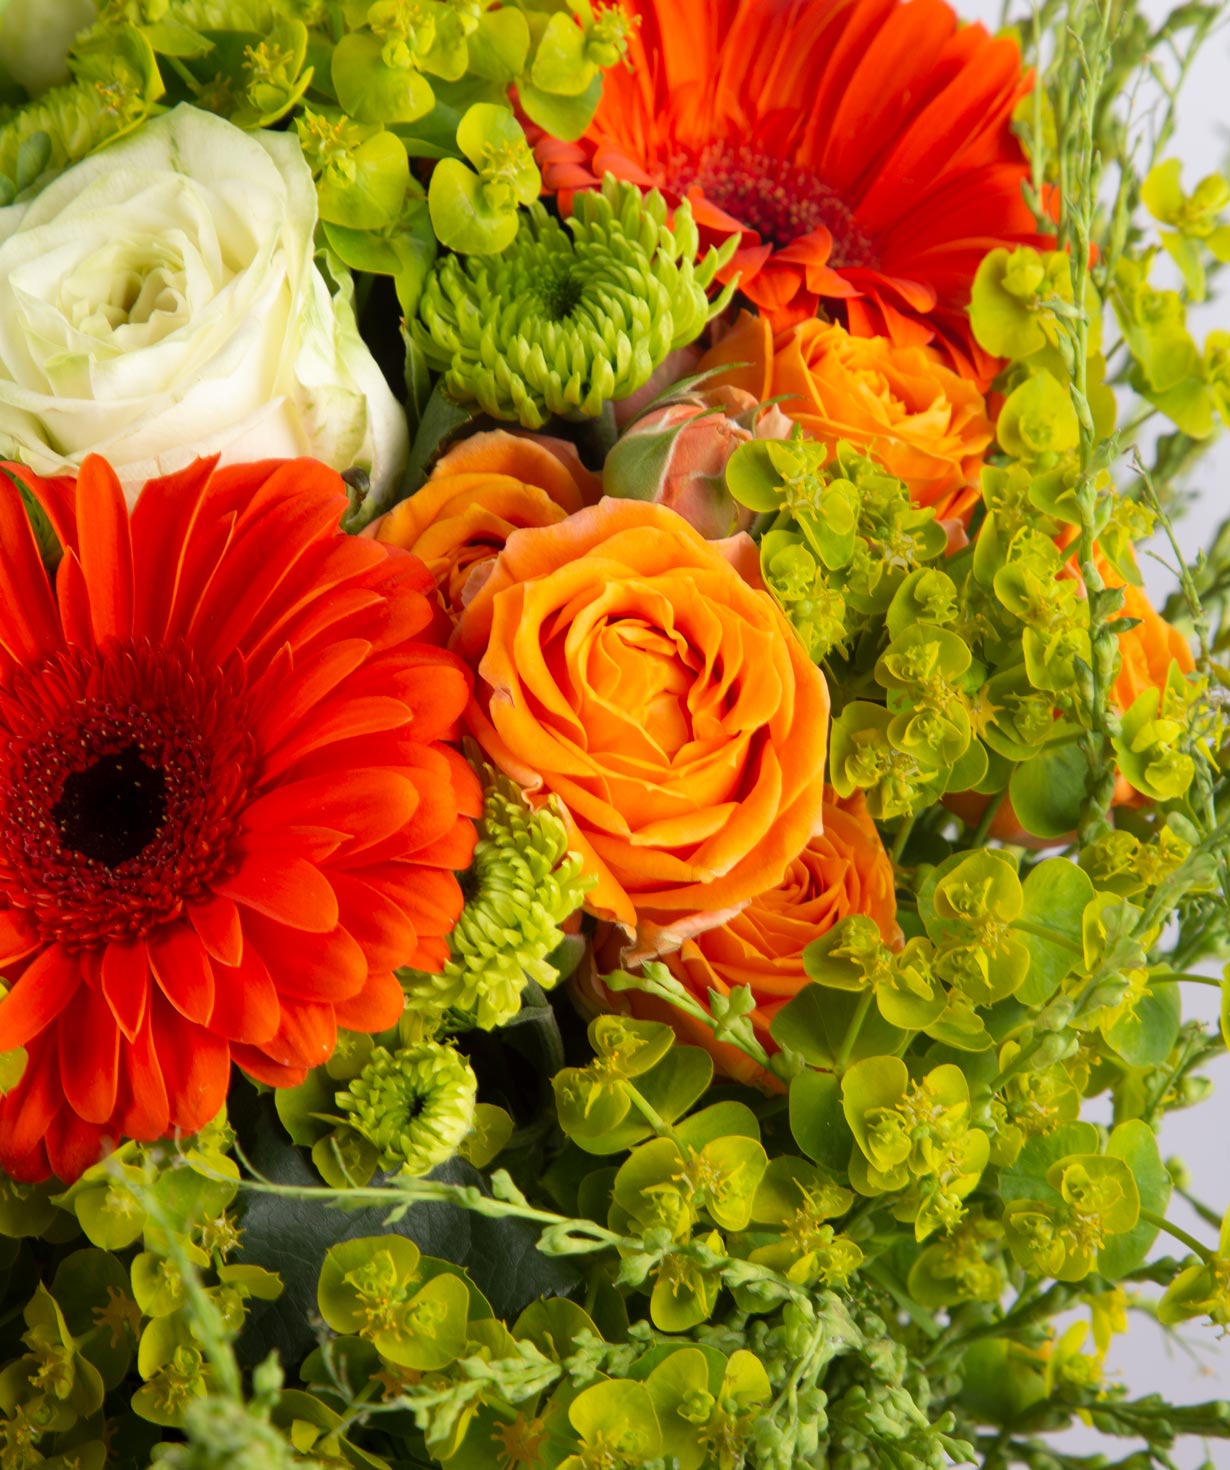 Bouquet «Cambridge» with roses and gerberas